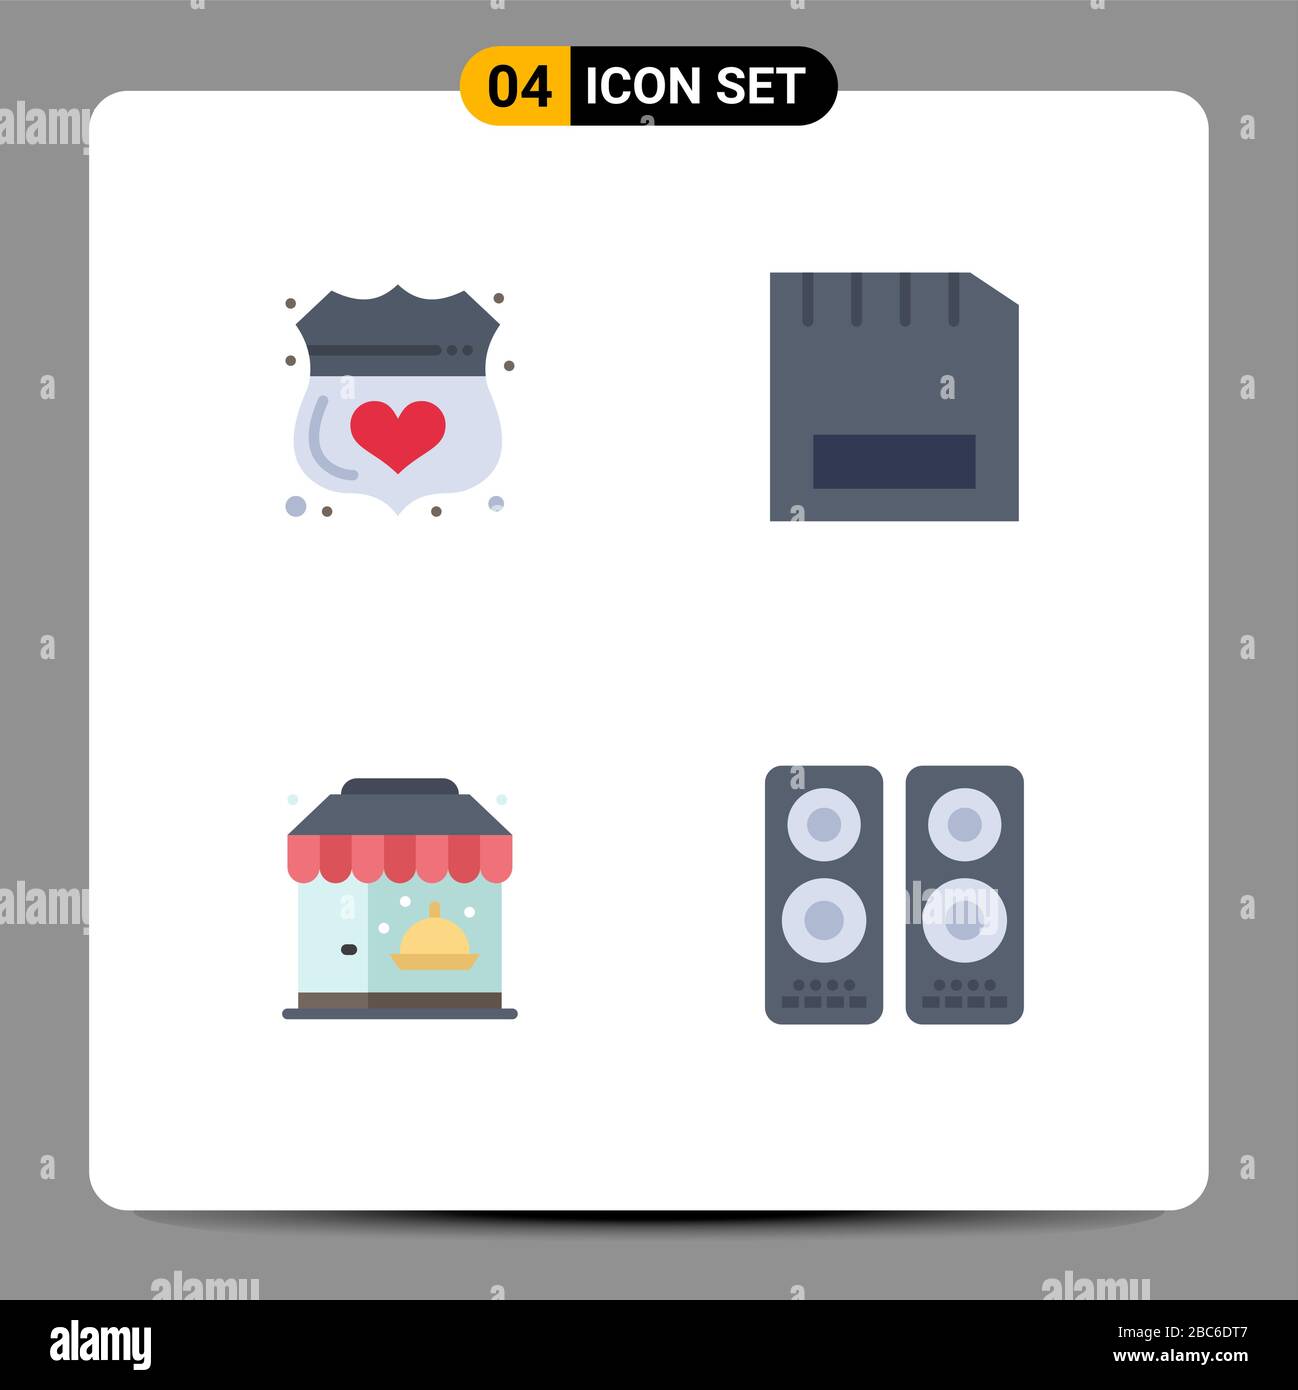 Pictogram Set of 4 Simple Flat Icons of guard, hardware, secure, computers, life Editable Vector Design Elements Stock Vector